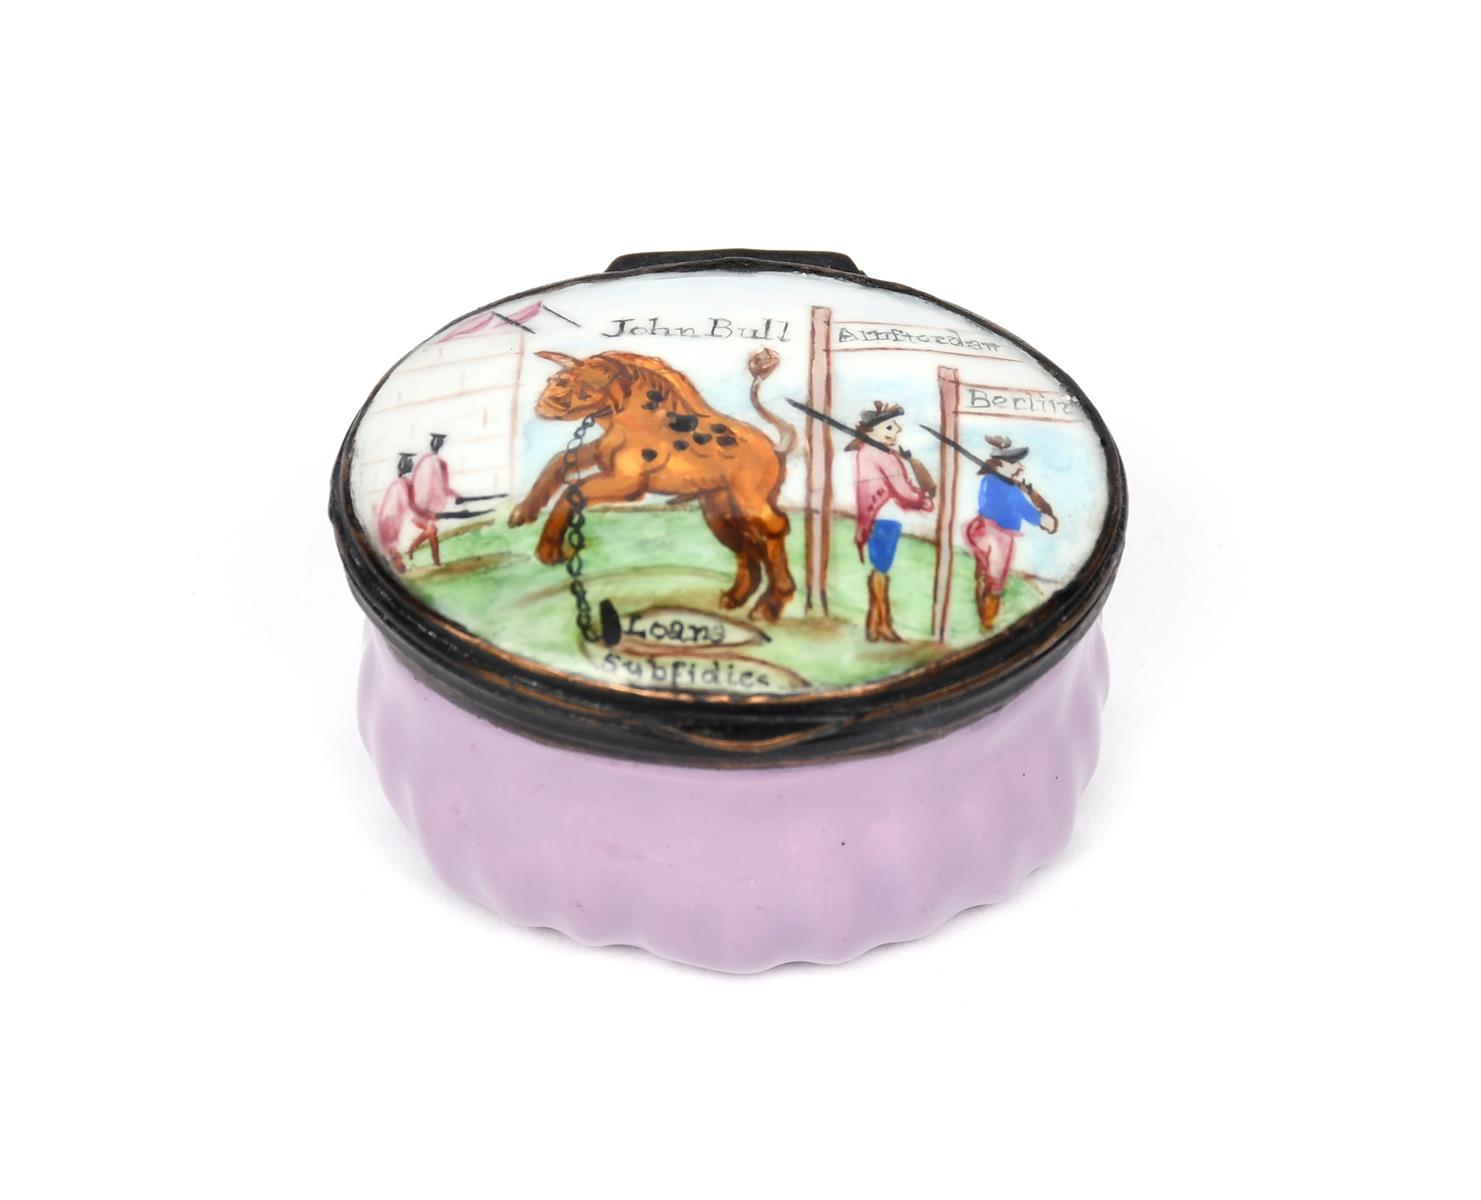 A rare South Staffordshire enamel commemorative patch box c.1815, painted with a large bull